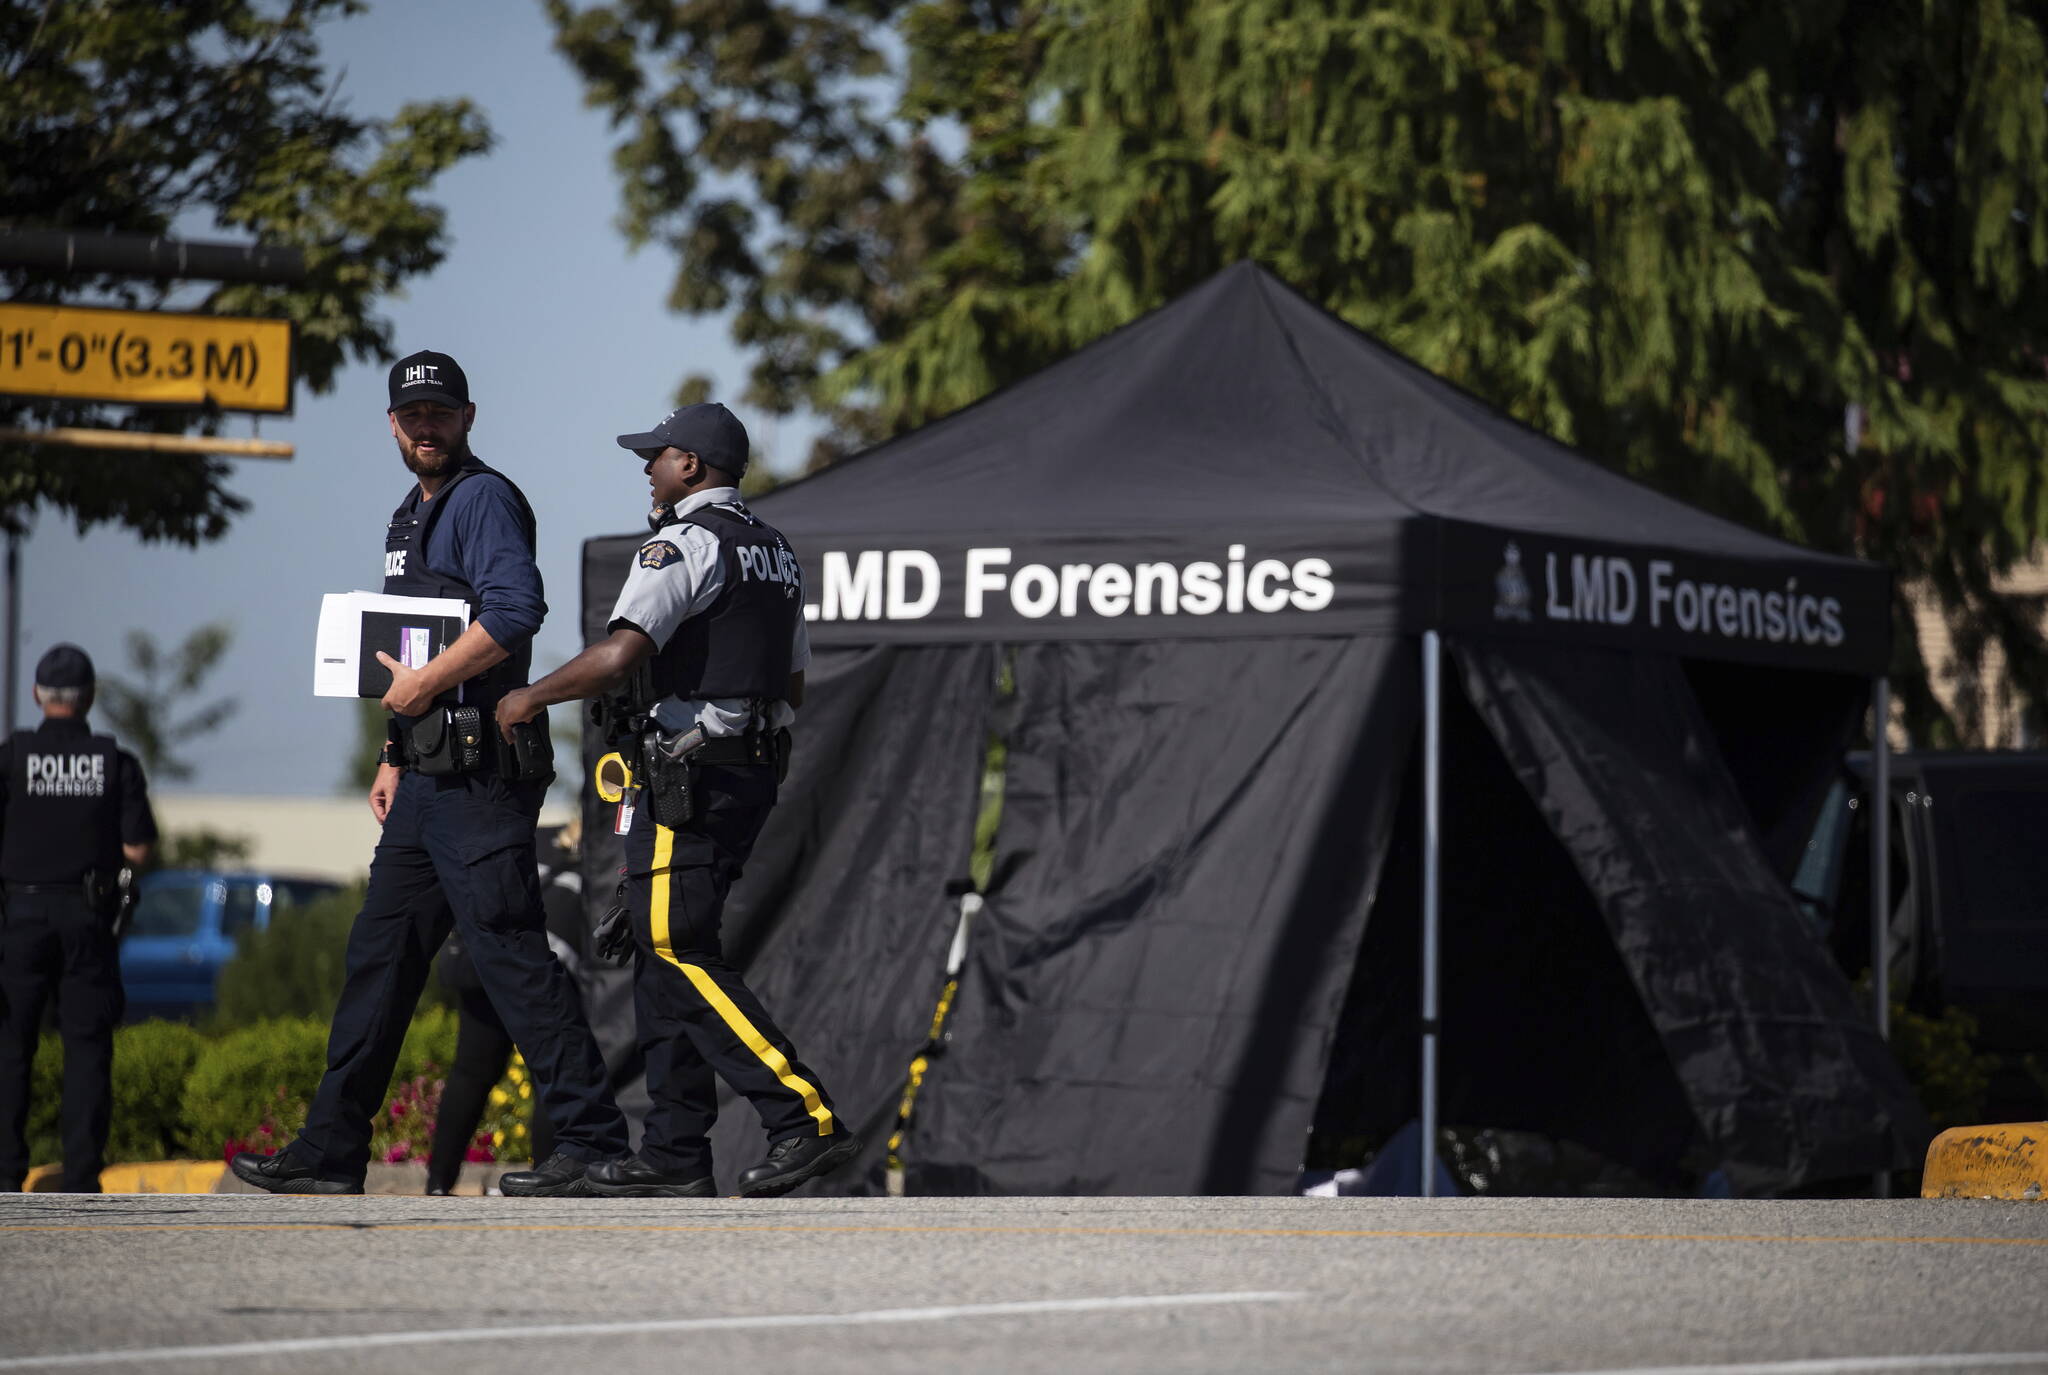 RCMP officers talk as a tent covers a body at the scene of a shooting in Langley, British Columbia, Monday, July 25, 2022. (Darryl Dyck/The Canadian Press via AP)